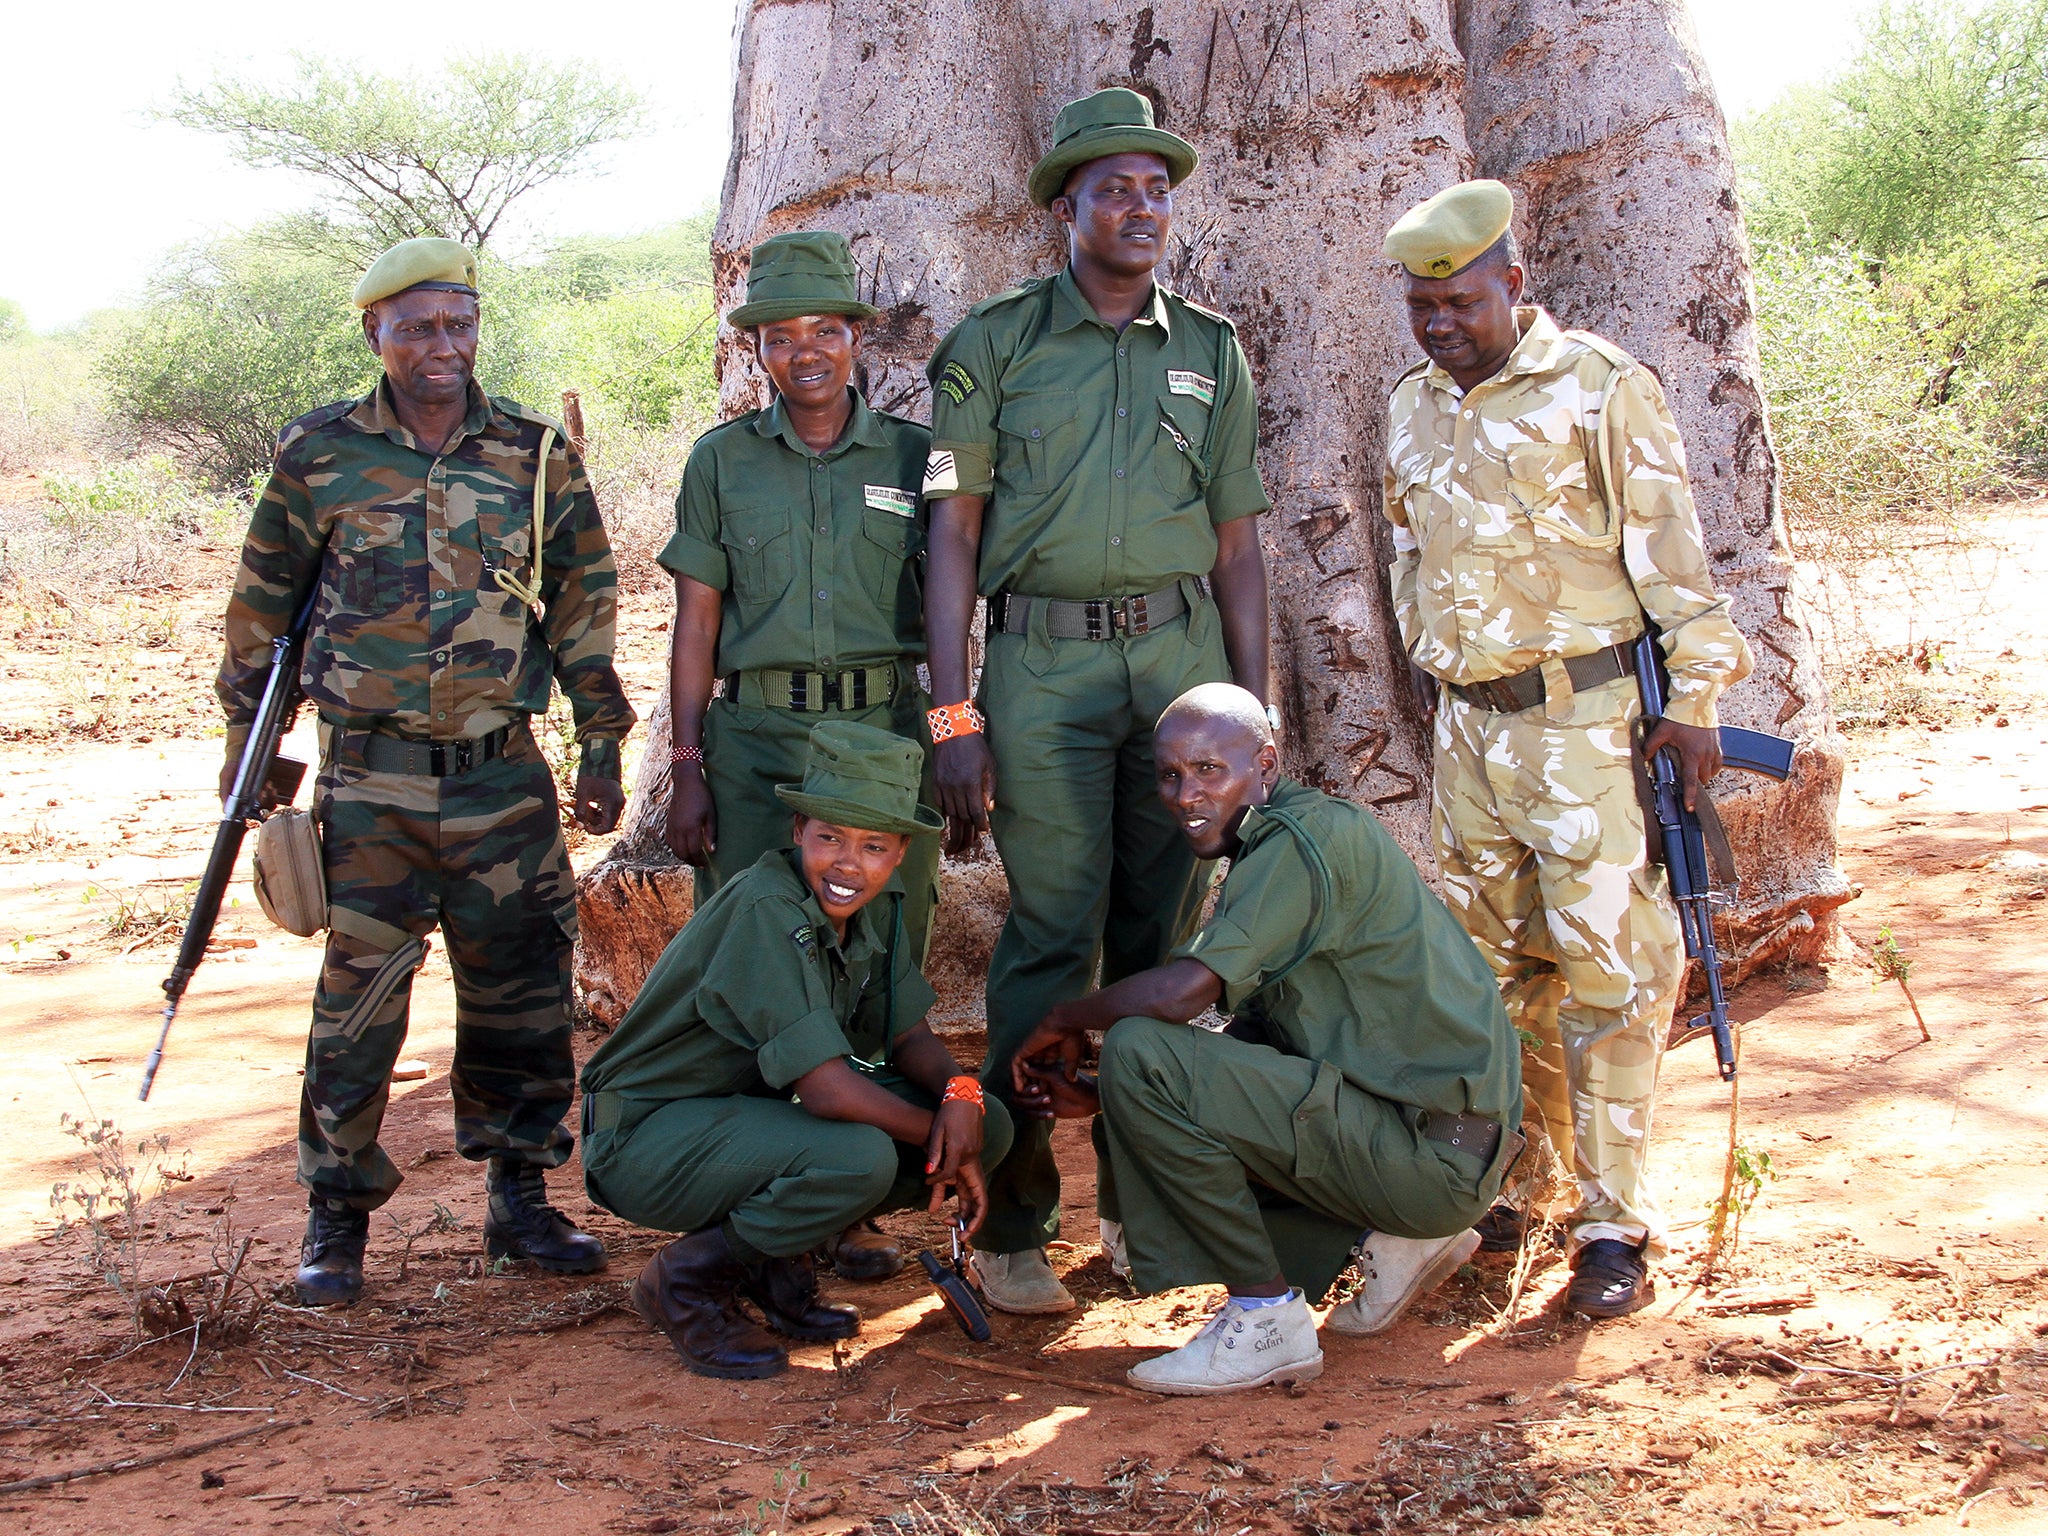 The community rangers team, in dark green, work together with the KWS rangers, in camouflage, on foot patrols around the park